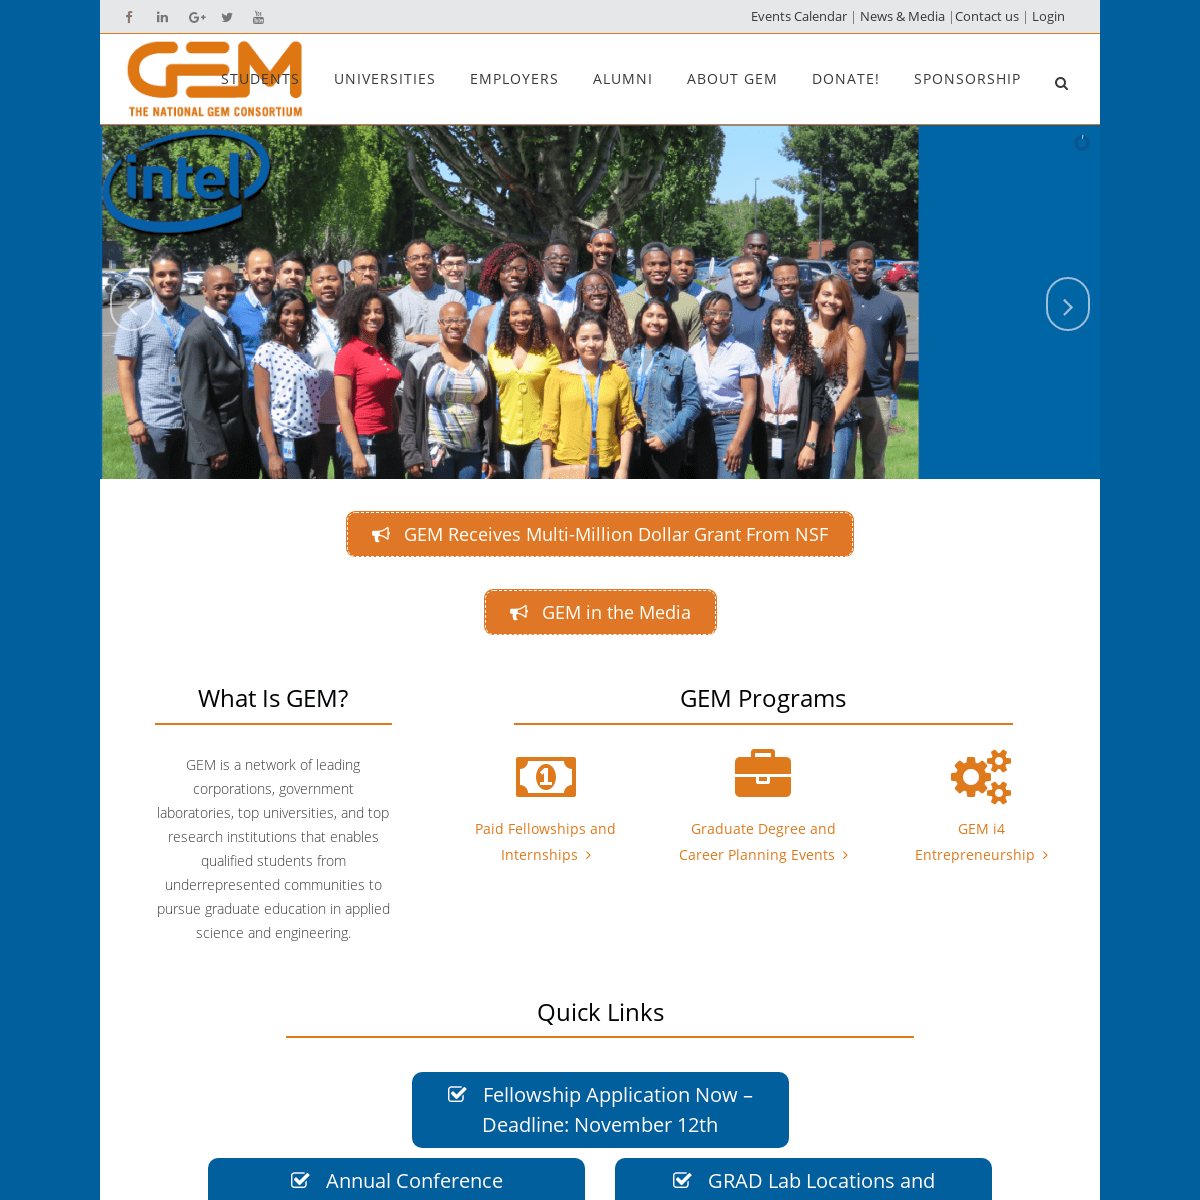 A complete backup of https://gemfellowship.org